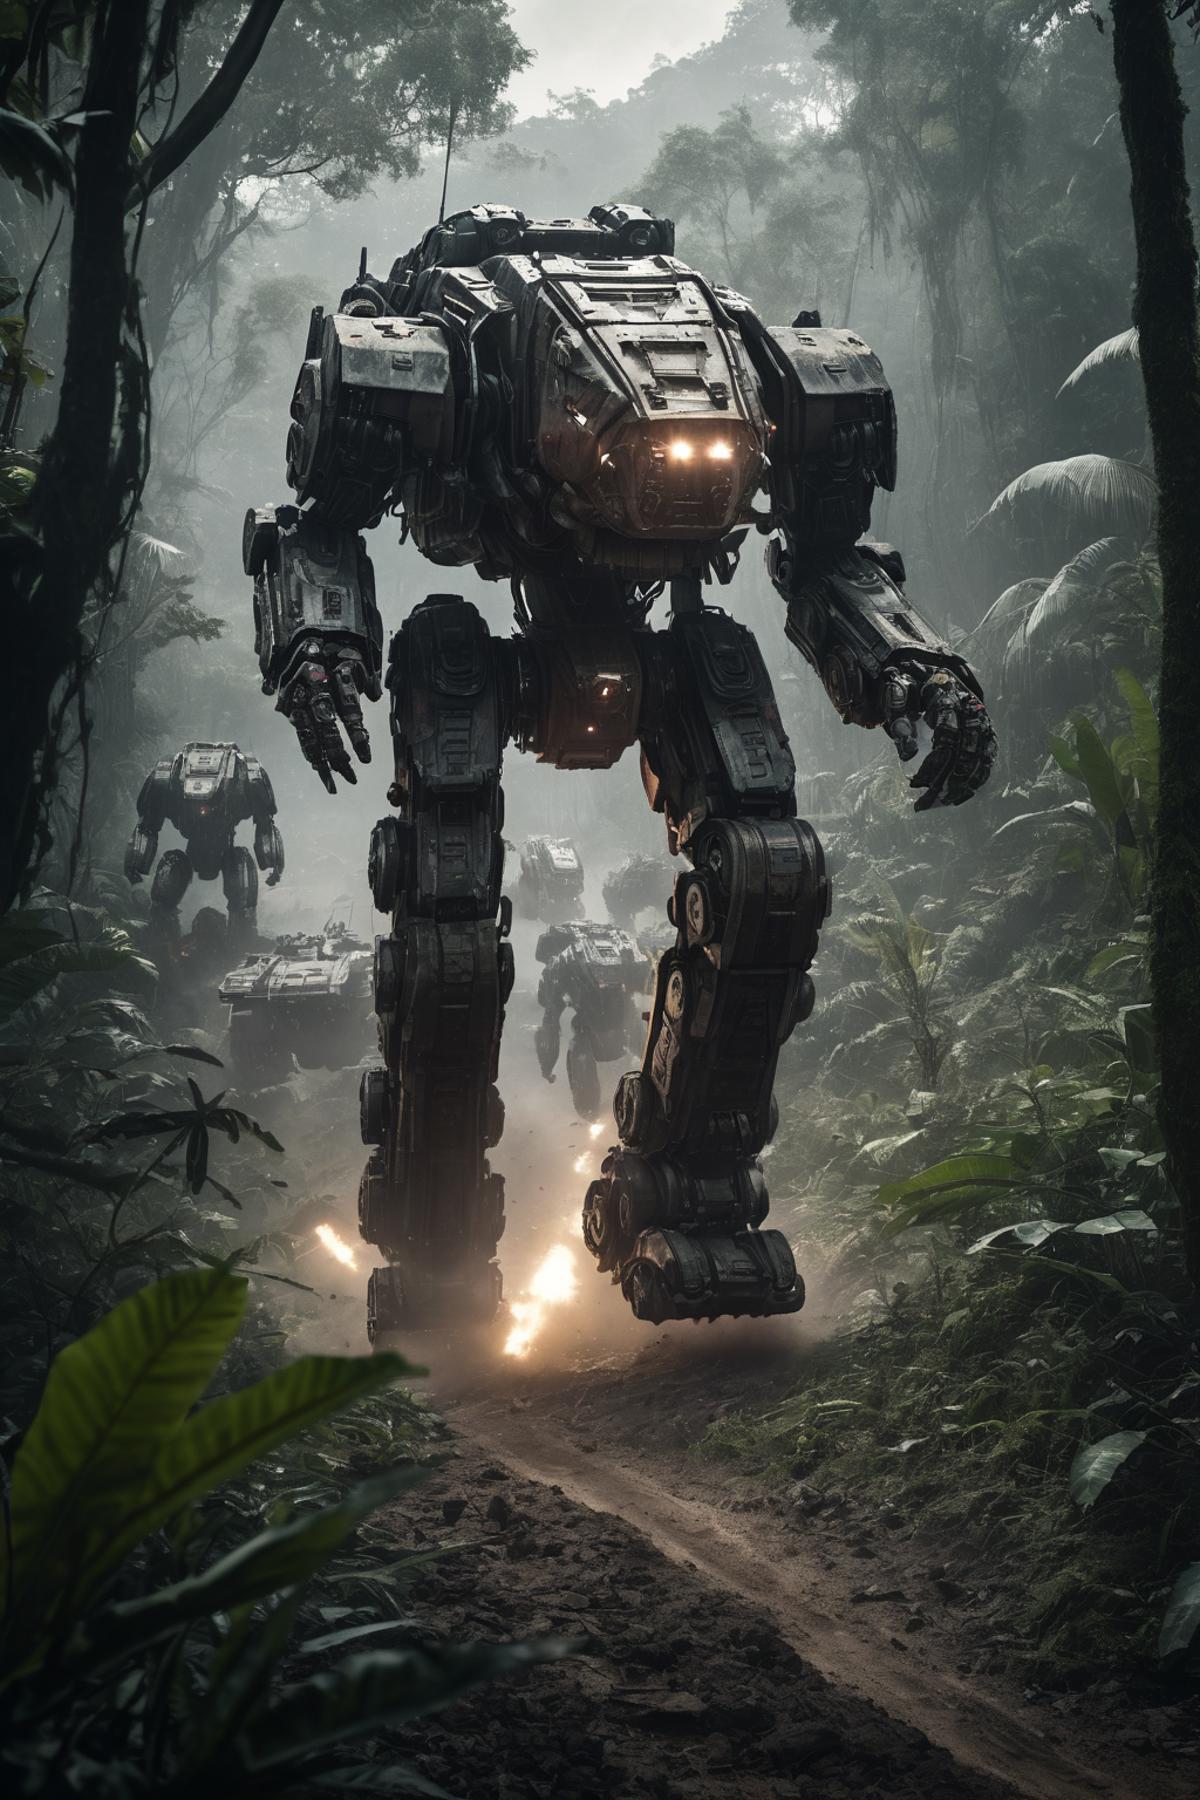 A group of robots walking through a forest, with one robot in the front taking the lead.